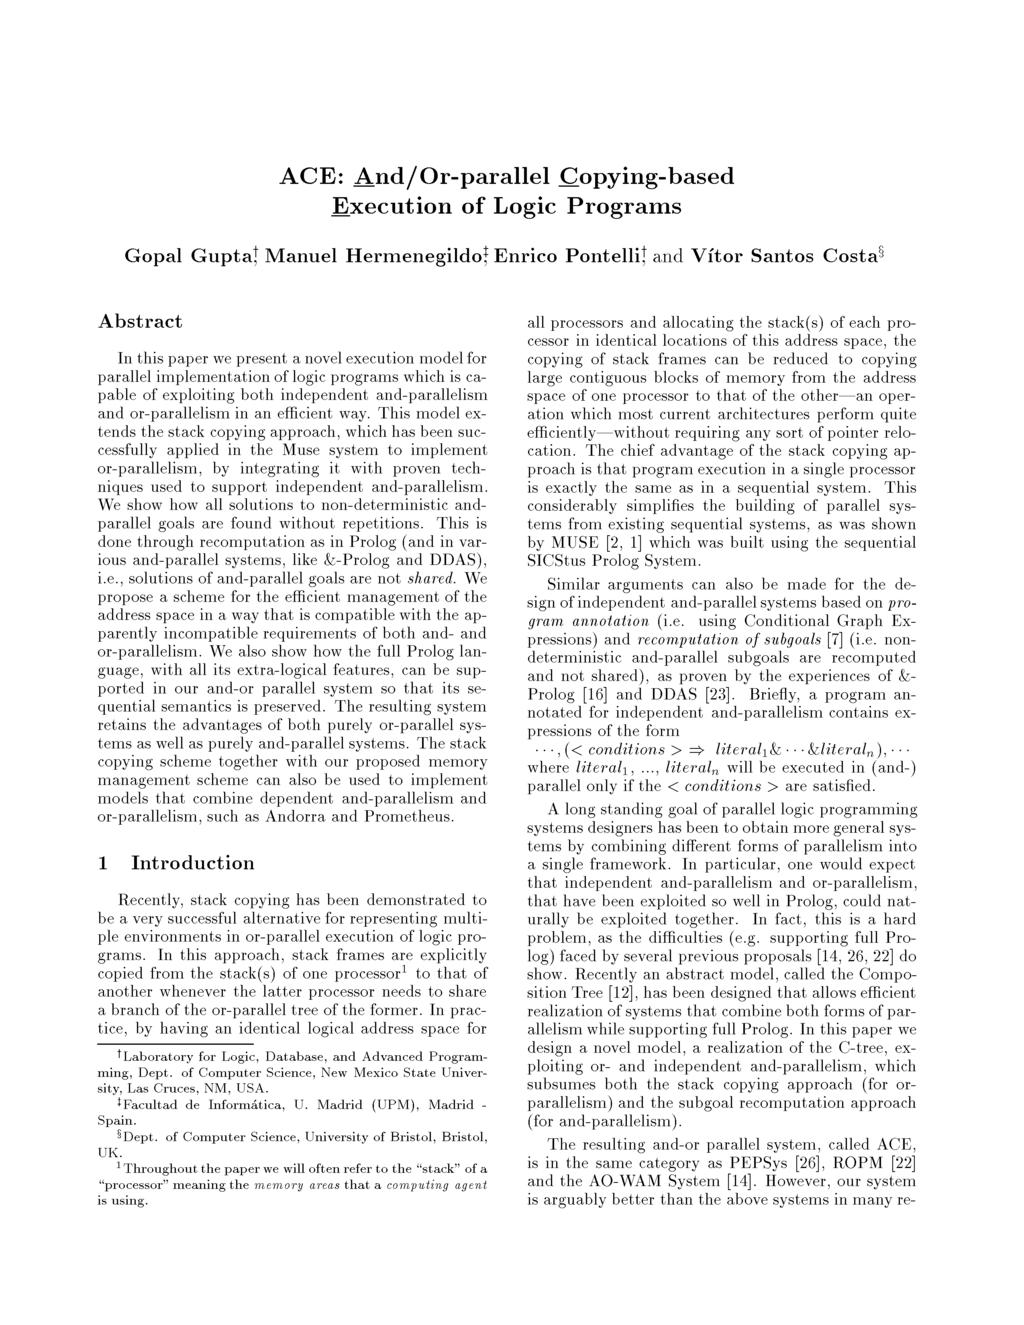 ACE: An/Or-parallel Copying-base Execution of Logic Programs Gopal GuptaJ Manuel Hermenegilo* Enrico PontelliJ an Vítor Santos Costa' Abstract In this paper we present a novel execution moel for